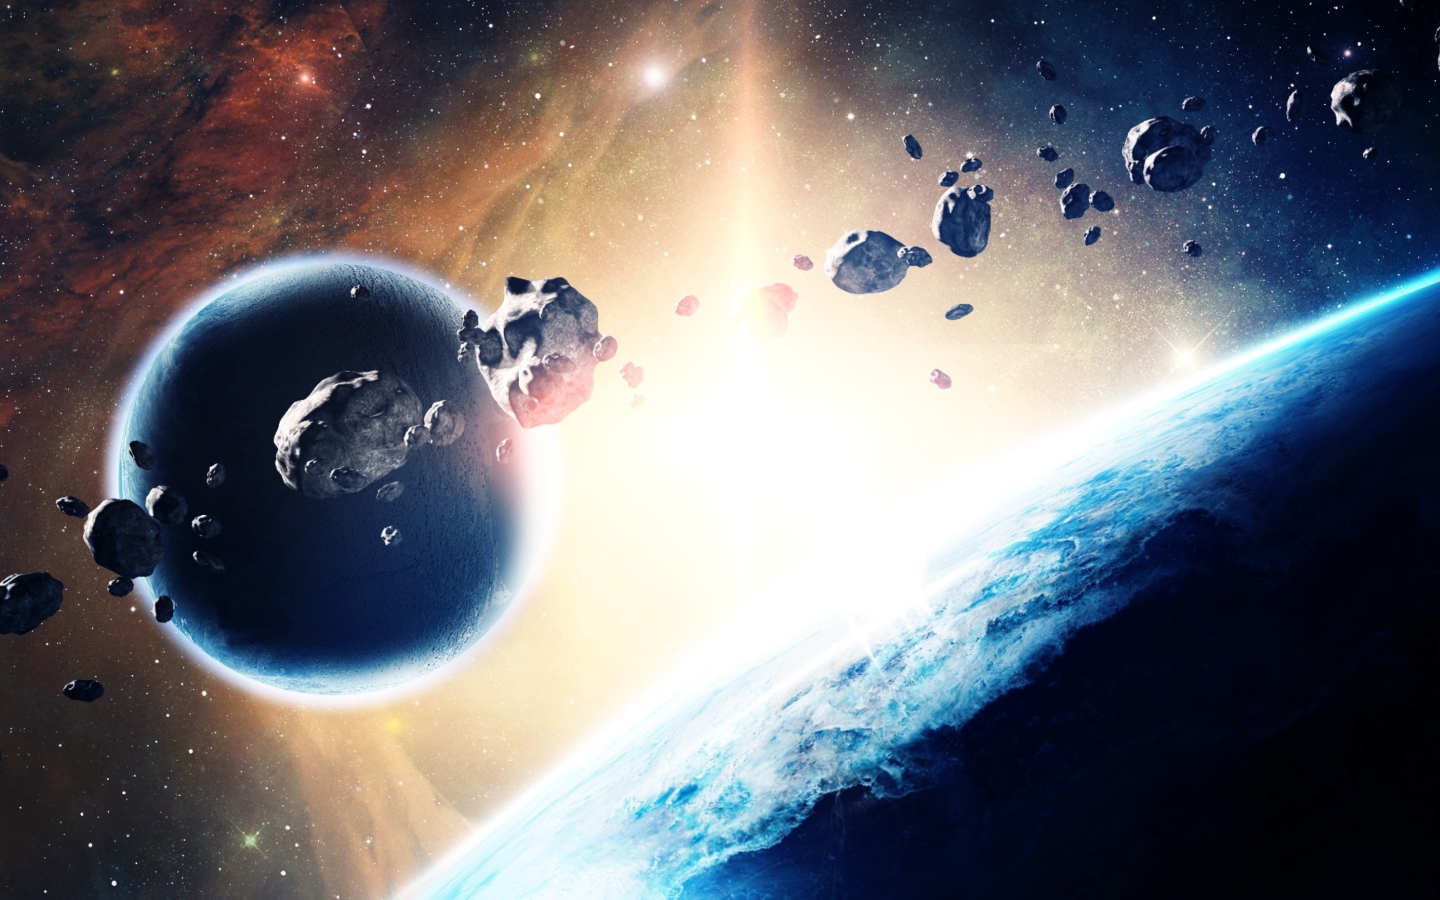 Asteroids In Space wallpaper 1440x900